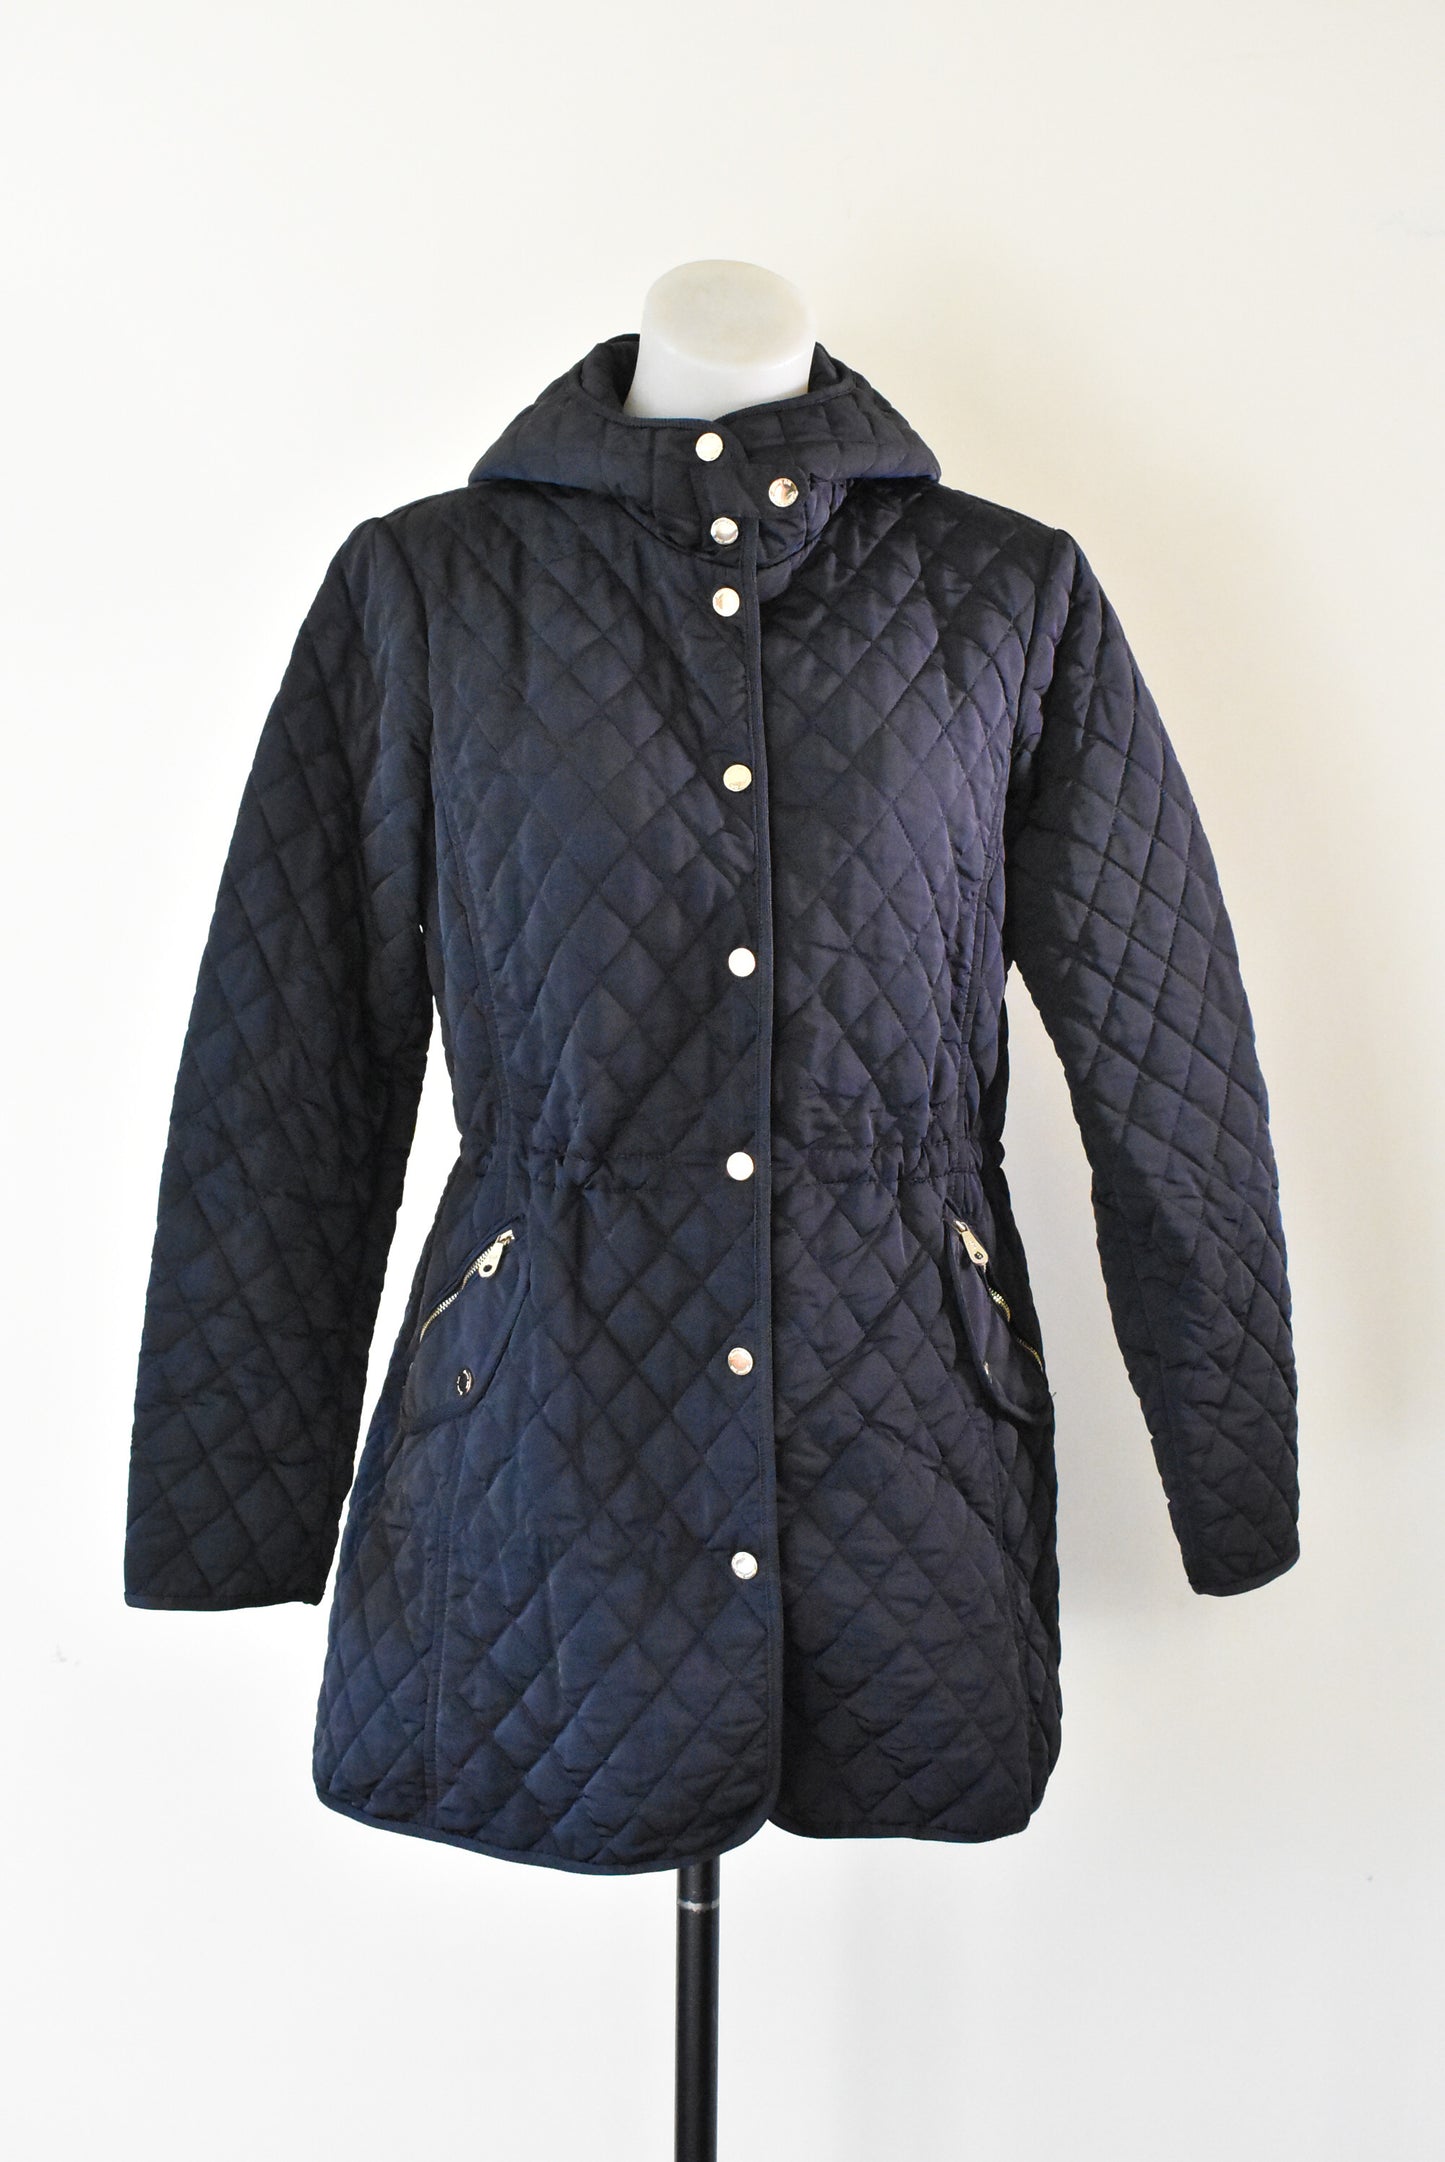 Massimo Dutti quilted jacket, M